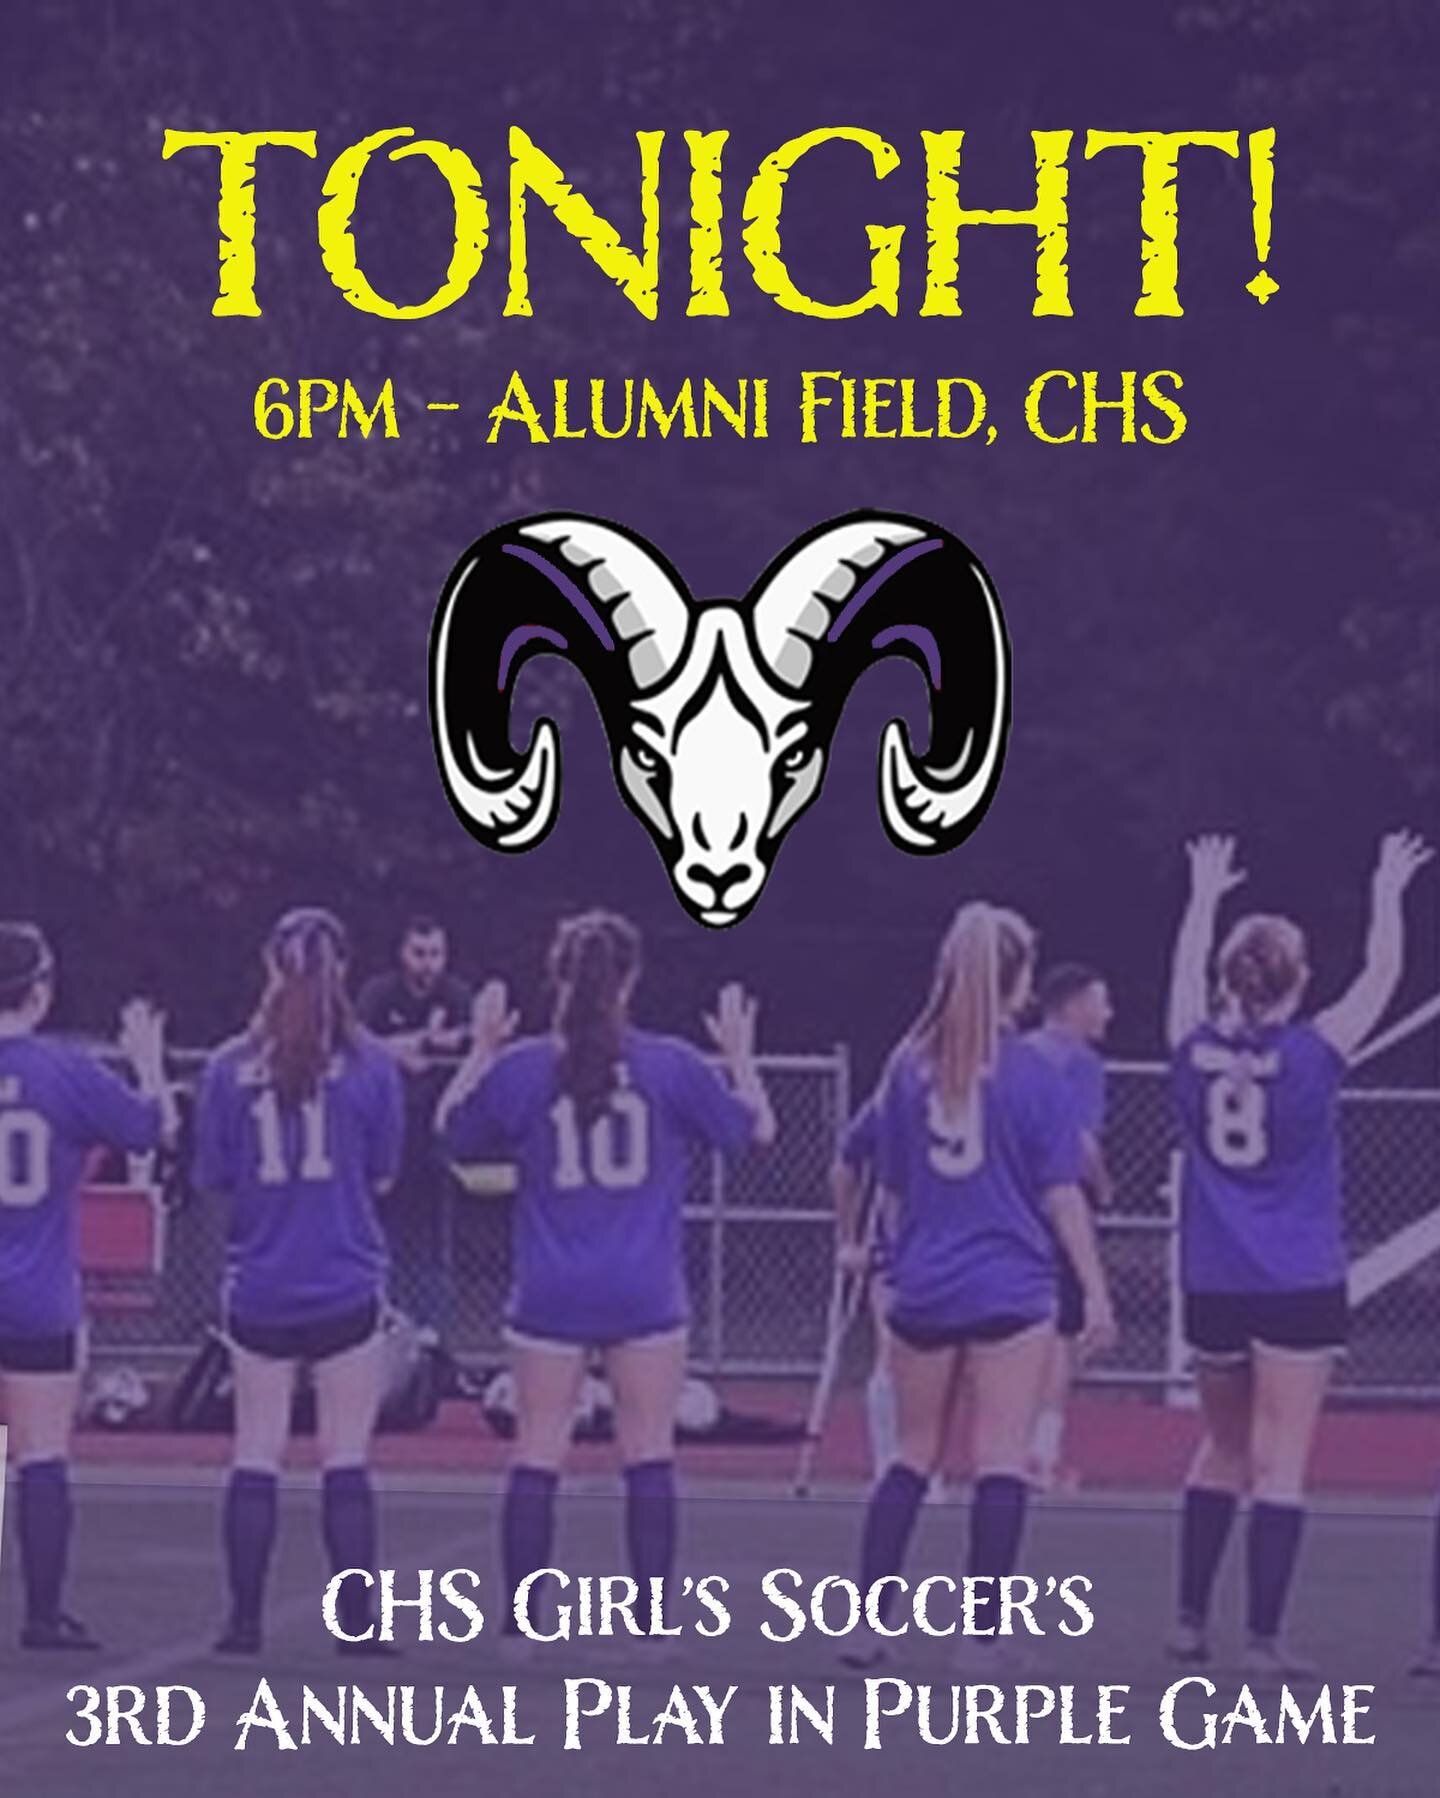 LETS GO RAMS!!! @chsgs_rams take on Foran tonight at 6pm for their 3rd Annual Play in Purple game!! The CHS Lady Rams are currently 14-0 and hold the #1 spot in the Southern Connecticut Housatonic Girls Soccer Standings!!&hearts;️⚽️🐏💜🎗️